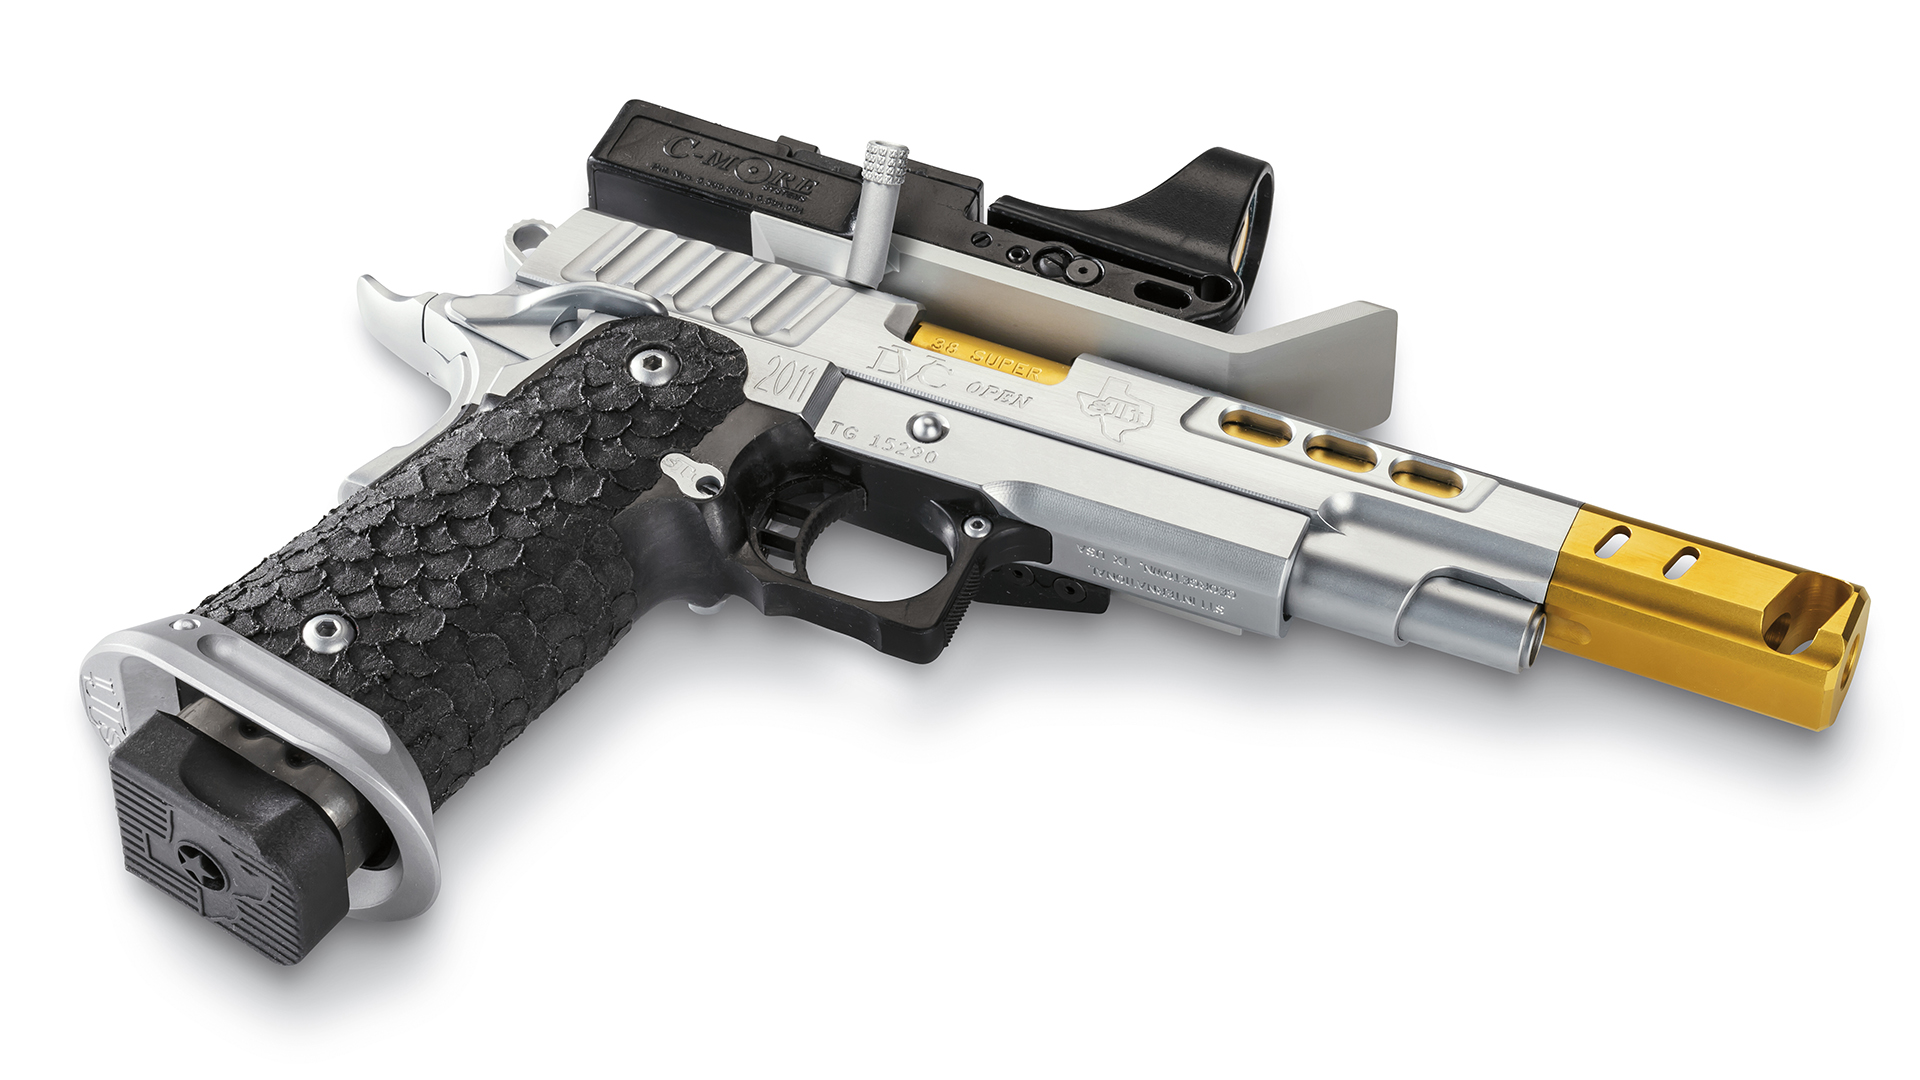 Sti S New Dvc Limited And Open Pistols News Article